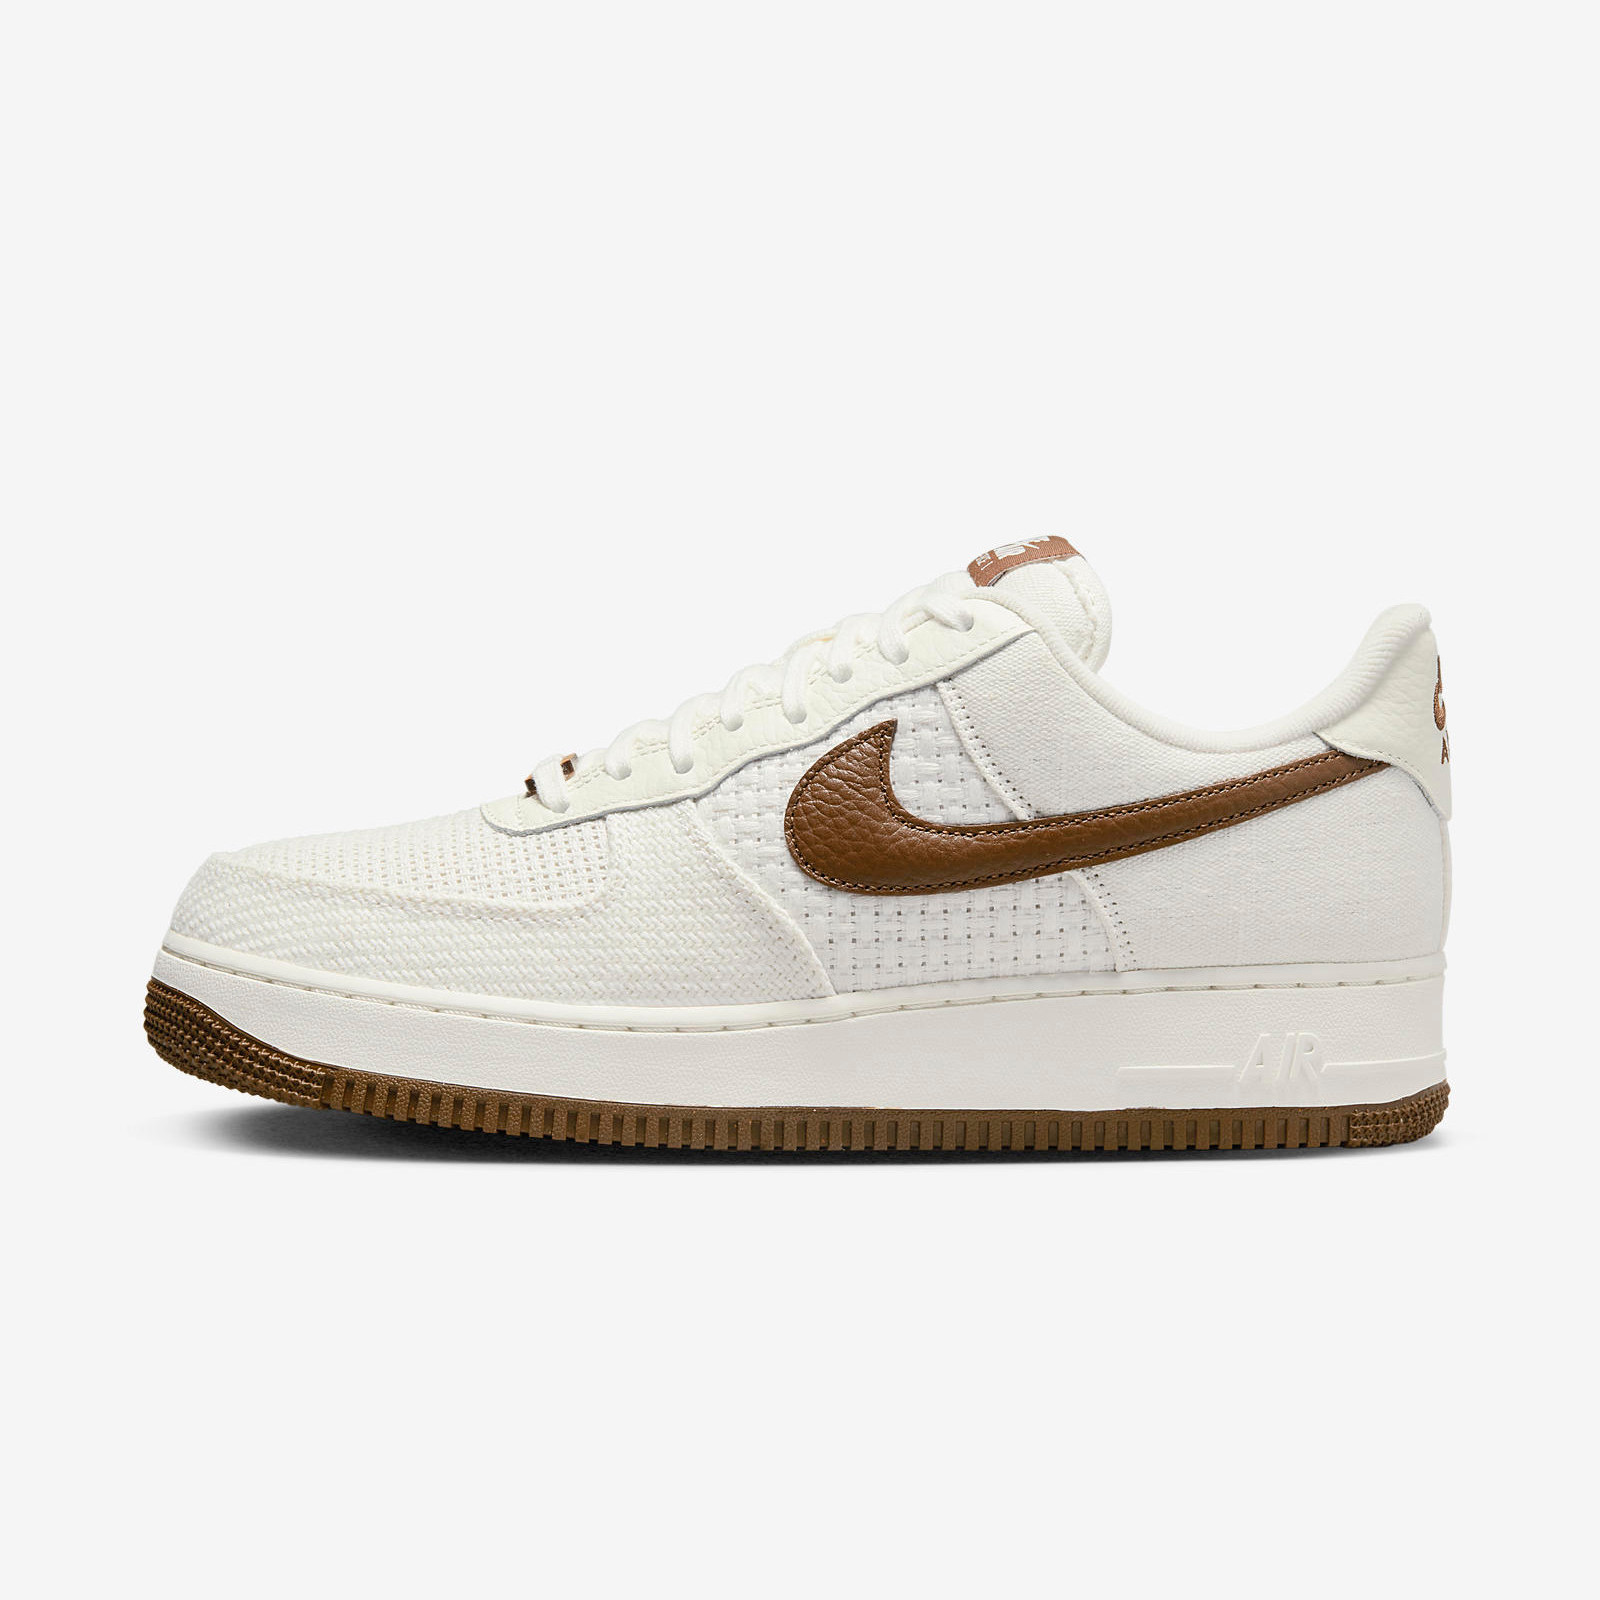 Nike Air Force 1
« SNKRS Day »